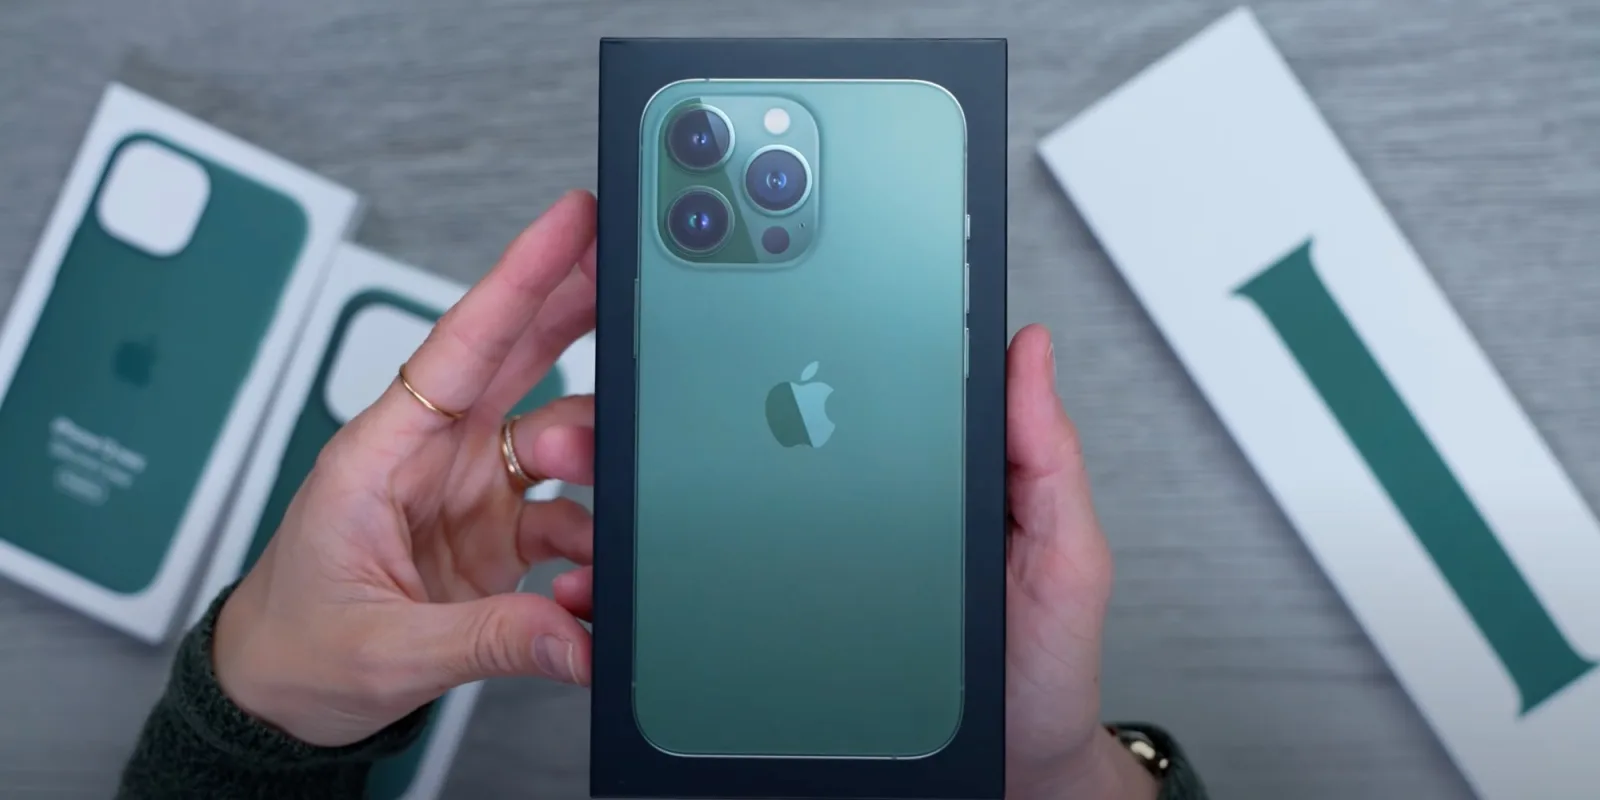 This image shows the iPhone 13 Pro box pack in the hands of man.